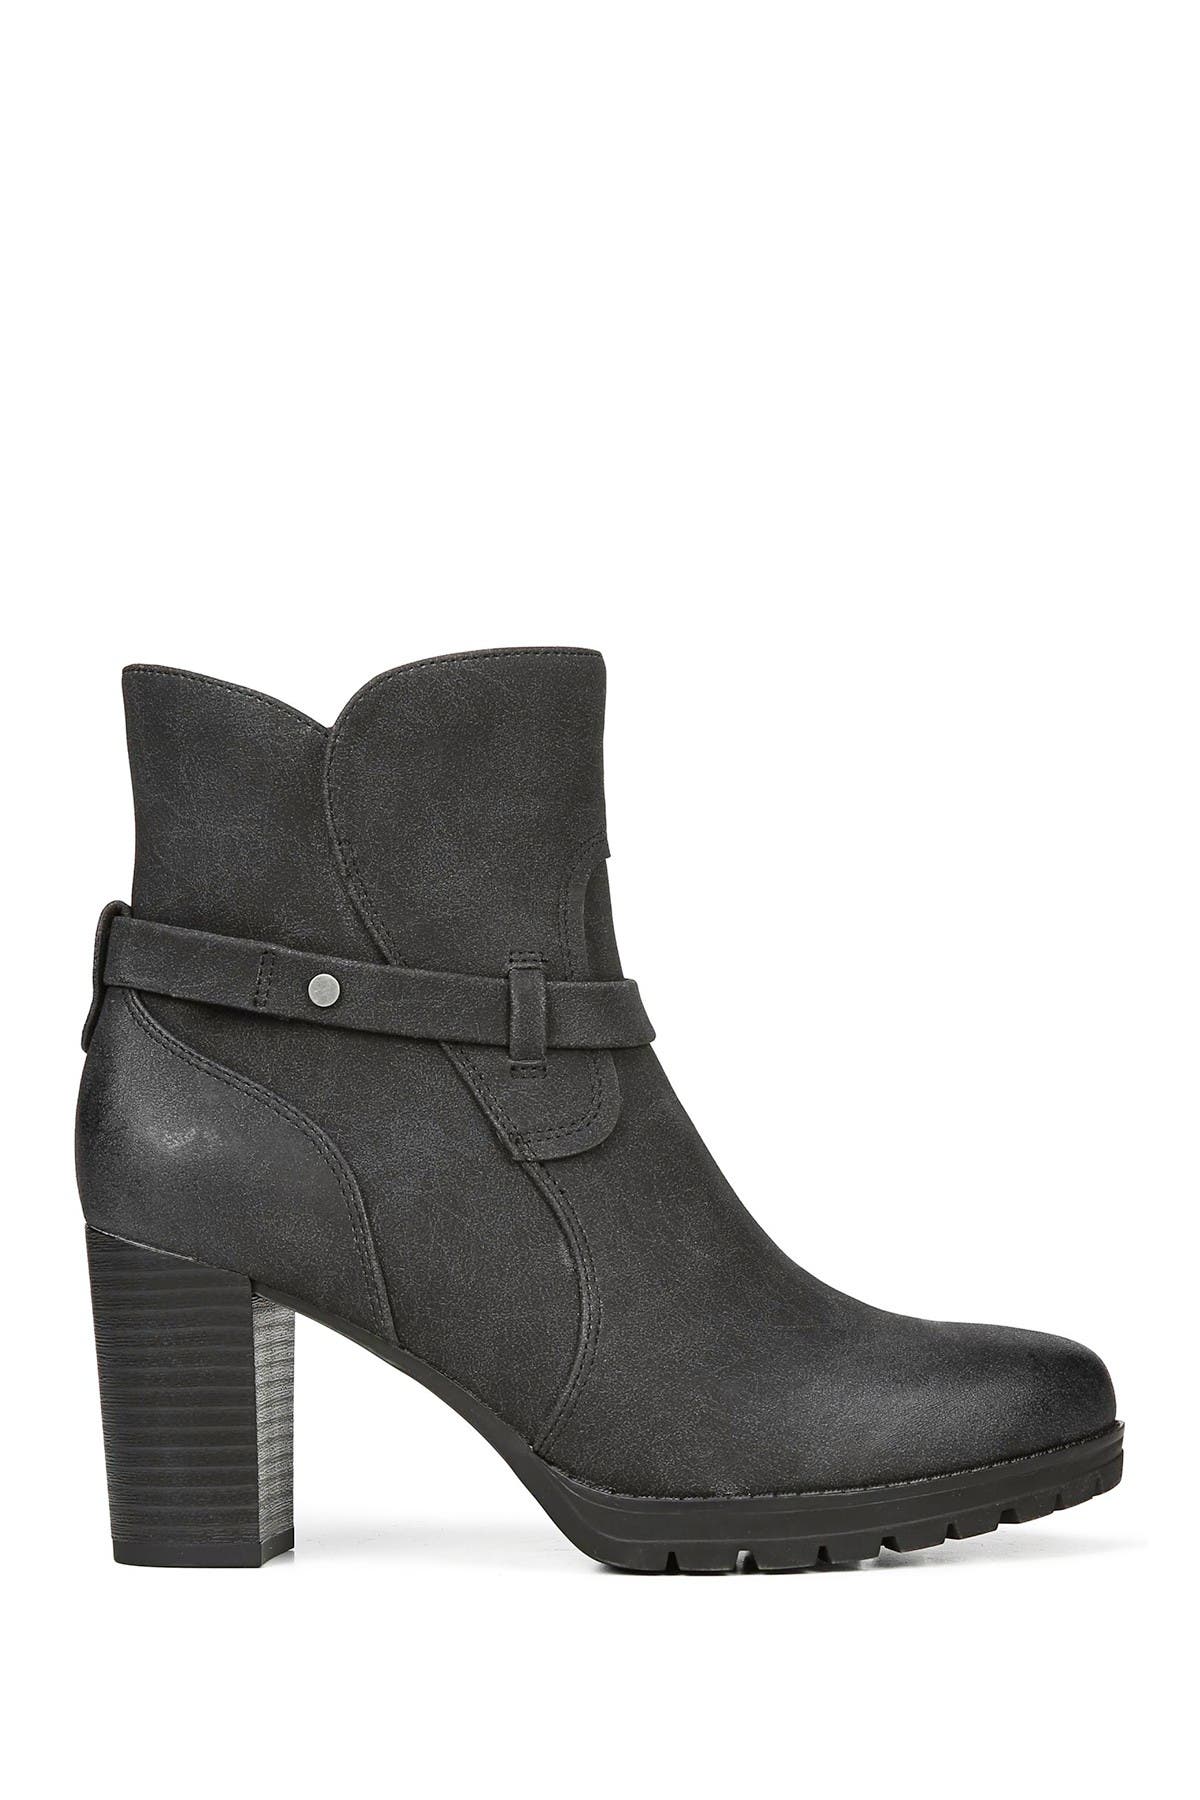 soul naturalizer fayth bootie